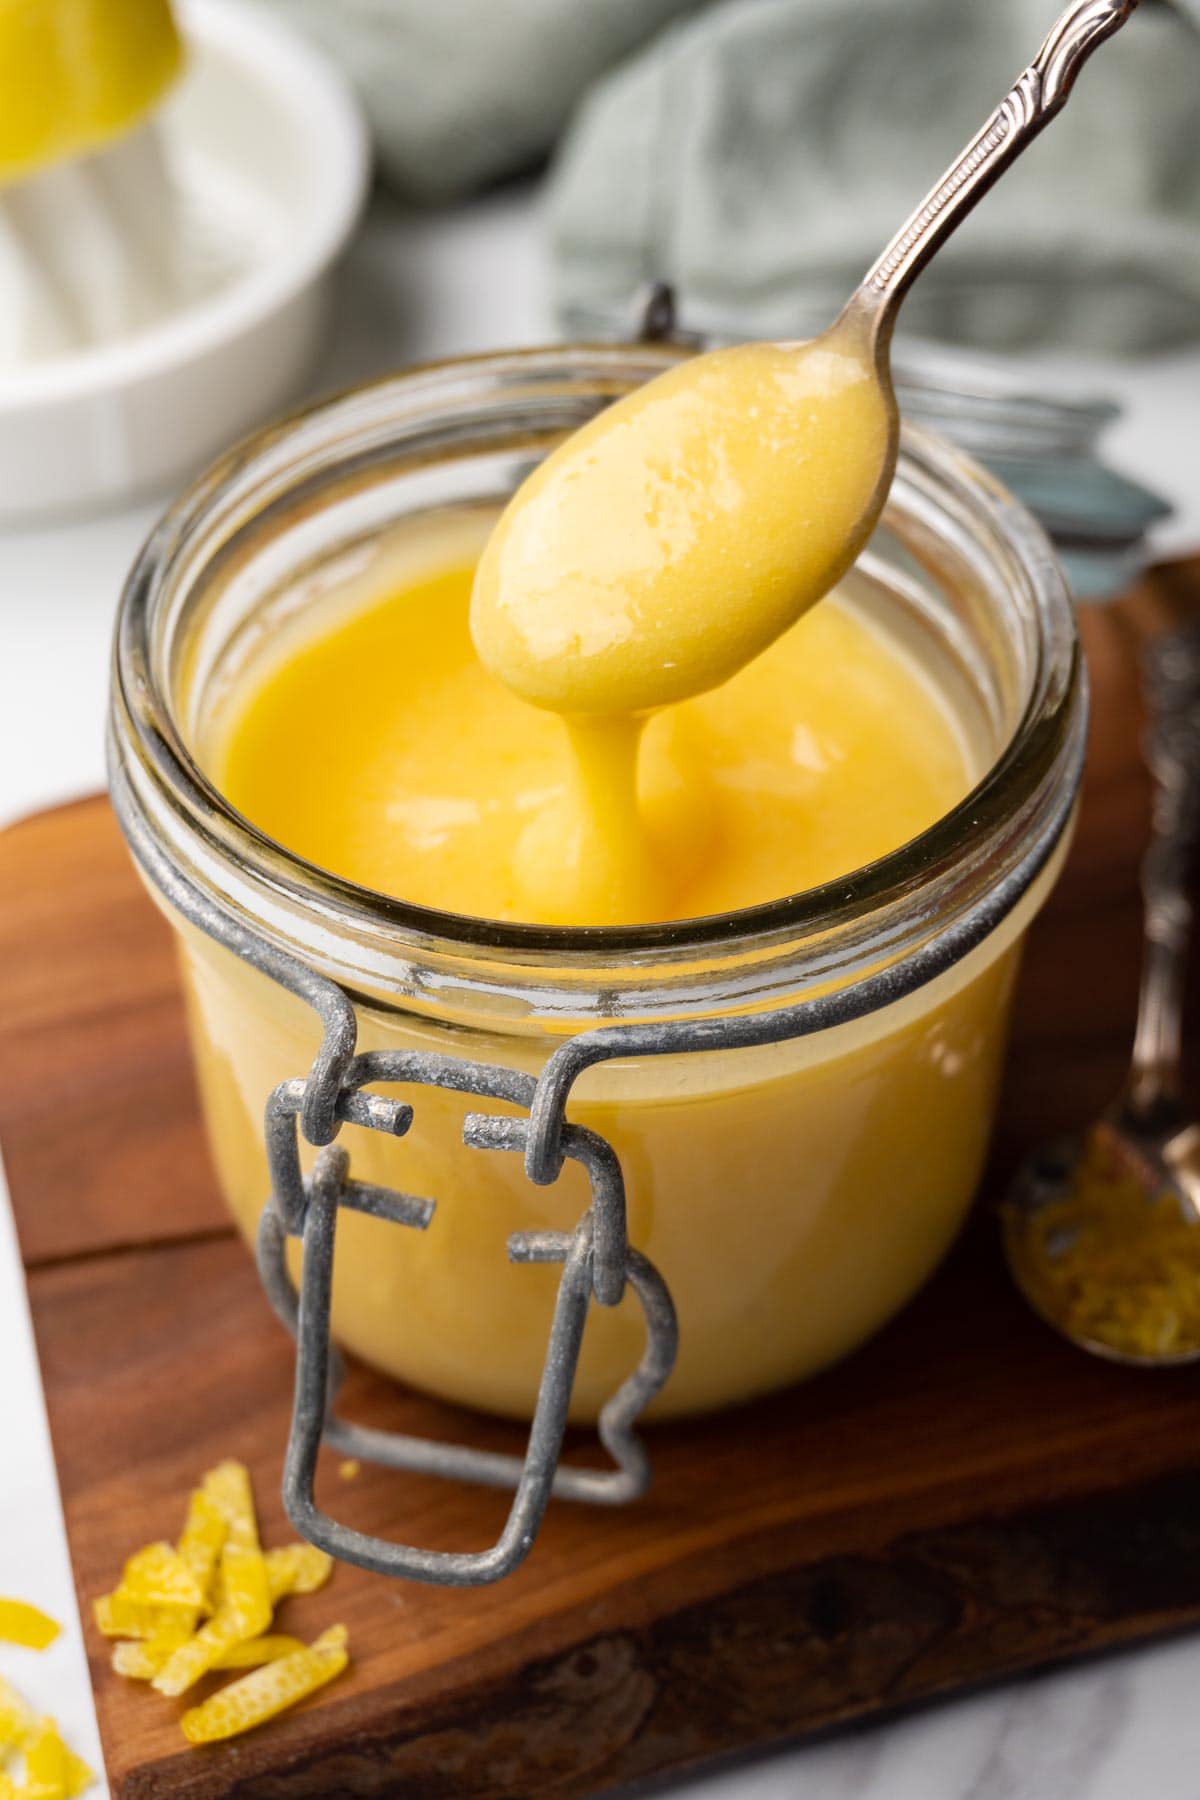 A glass jar filled with lemon curd is standing on a wooden board. A silver spoon is taking out some of the curd.